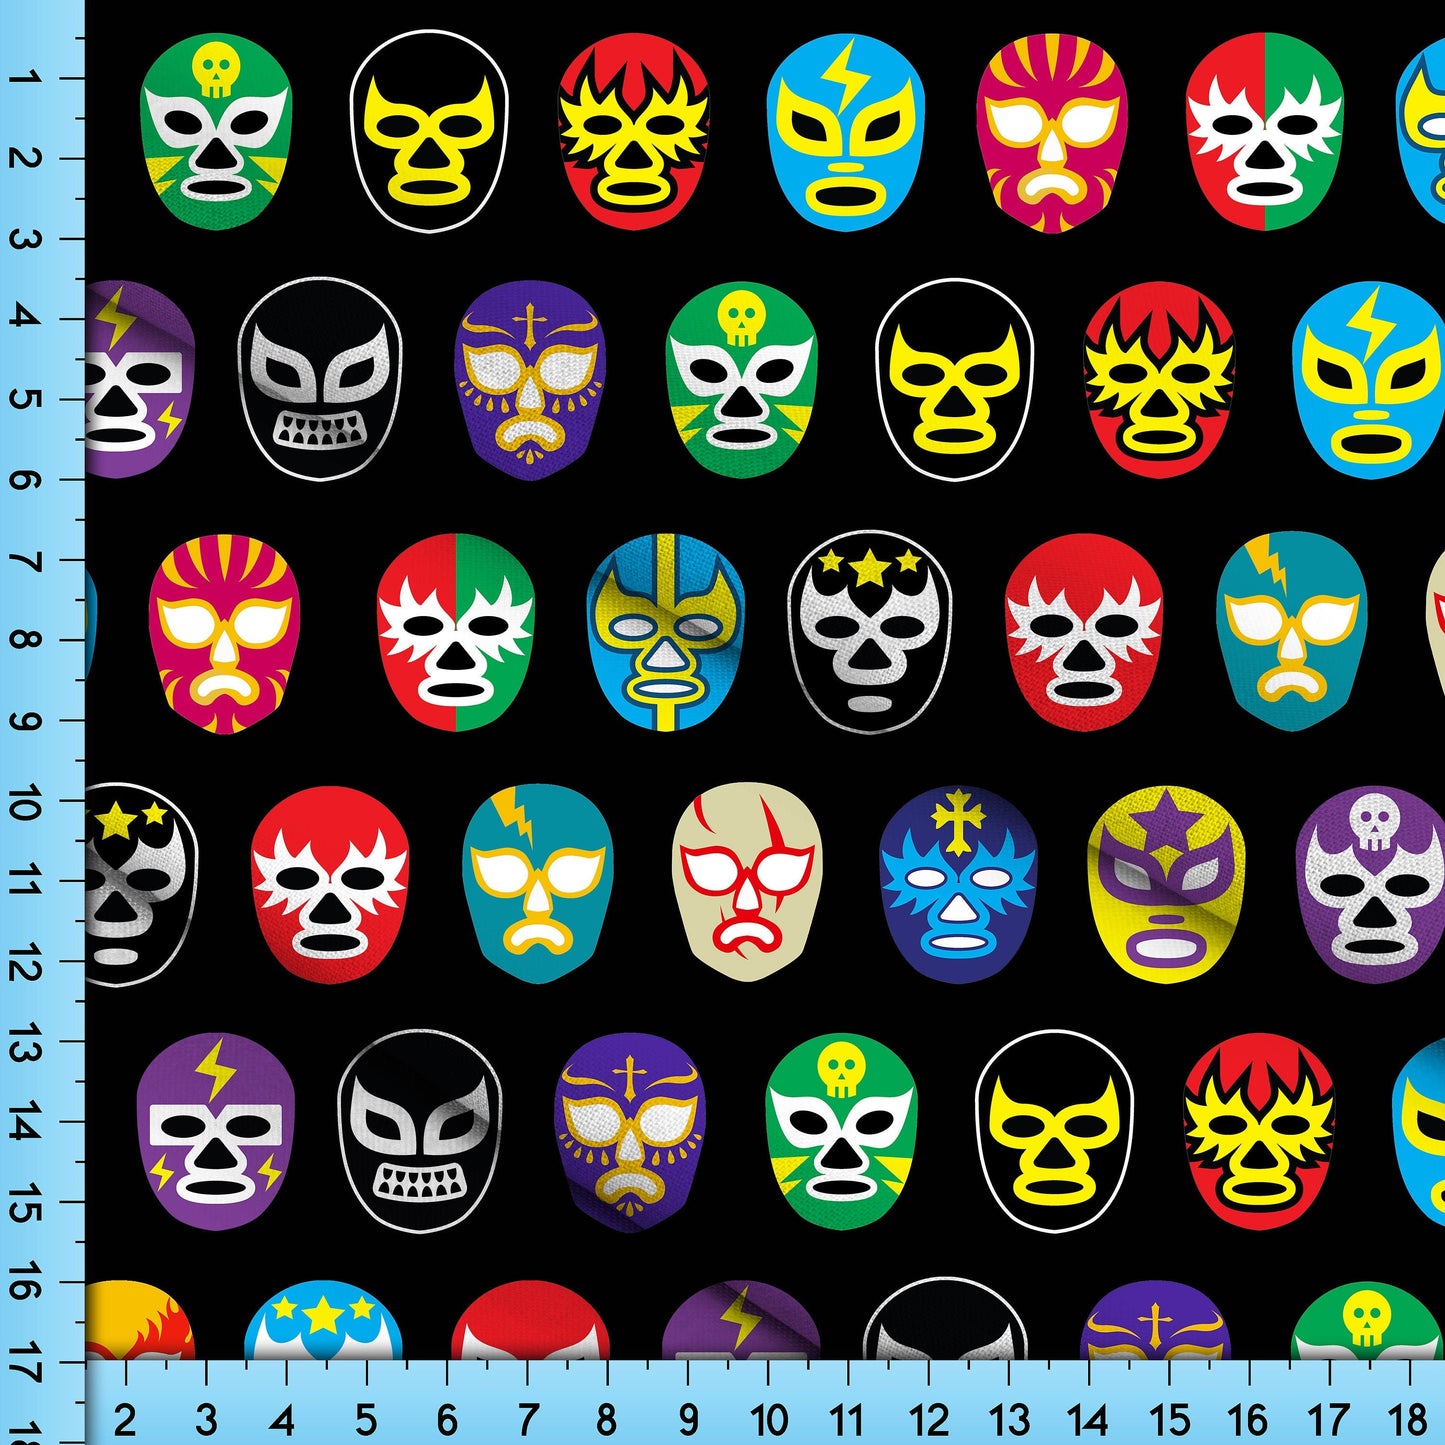 Wrestler Fabric Lucha Libre Mexican Masked Wrestlers Printed By the Yard on the fabric of your choice.